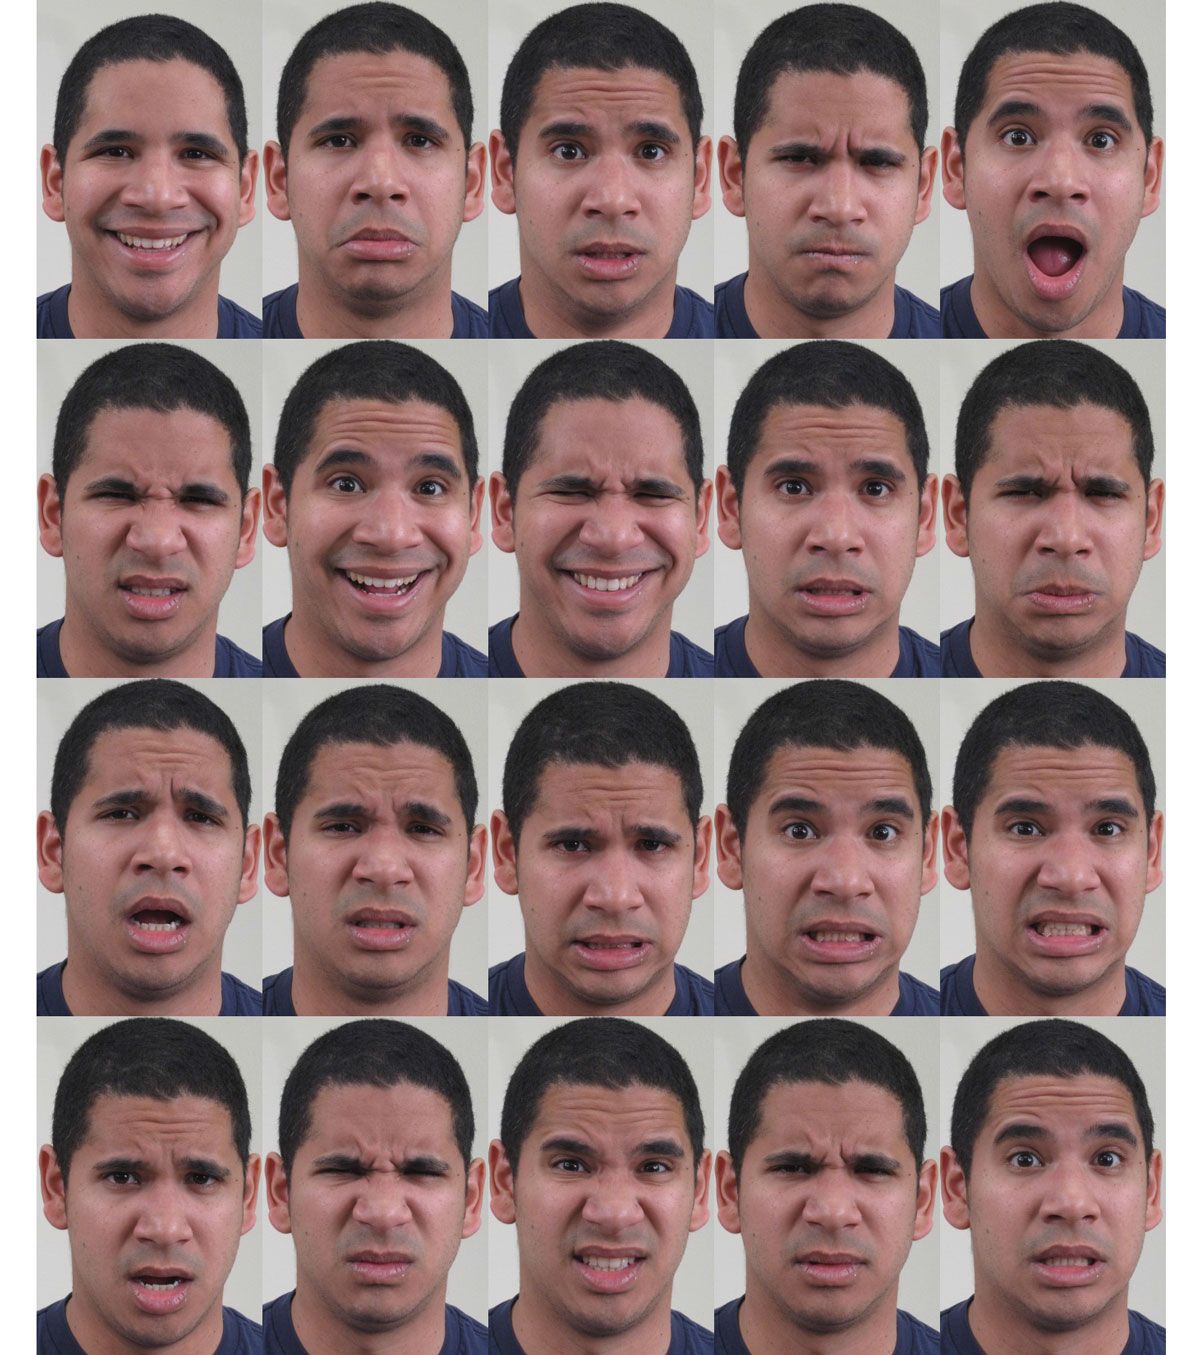 a collection of 20 photos of a man expressing different facial expressions